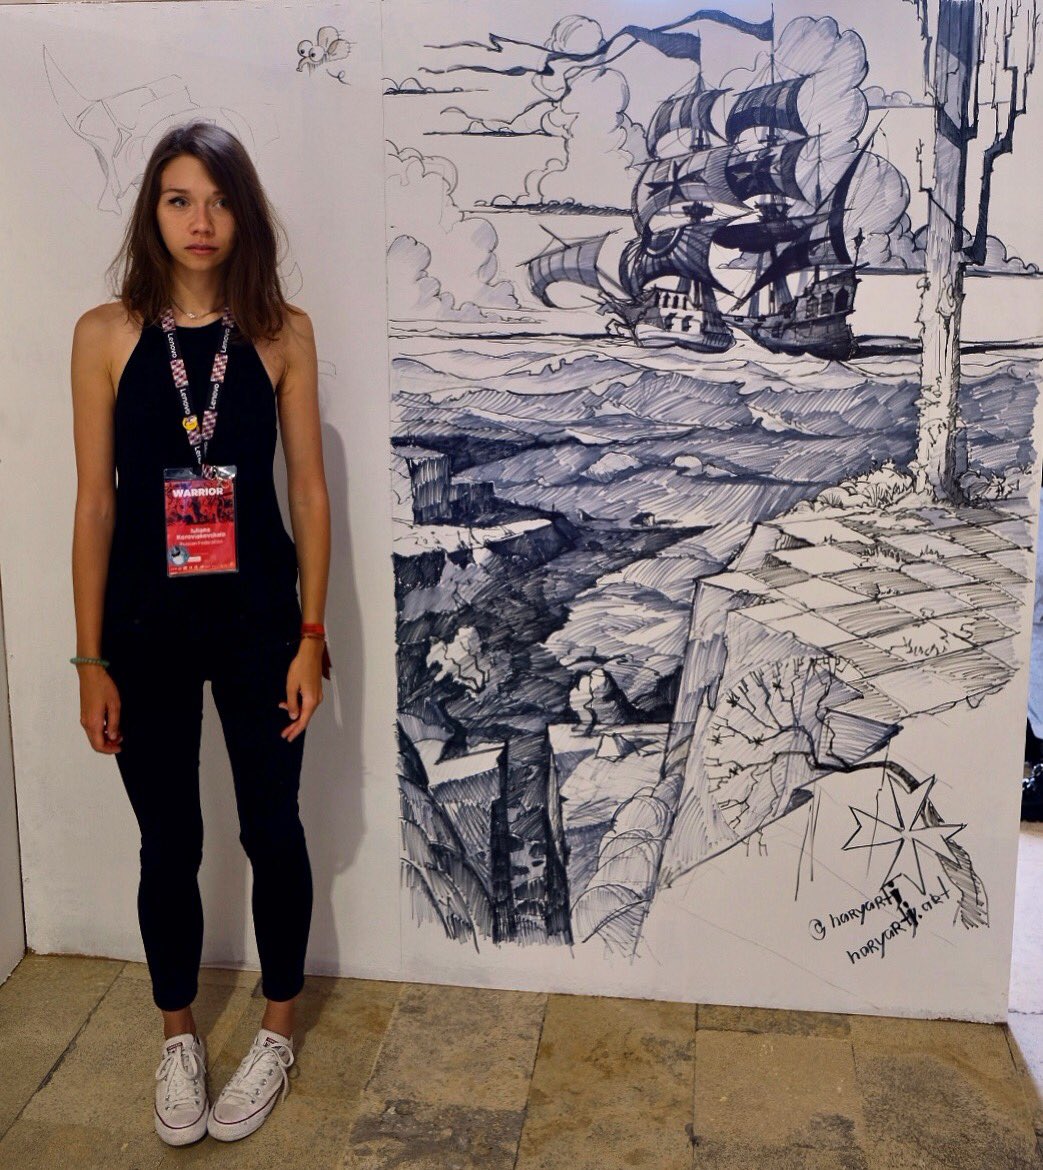 Drew this in Eyvind Earle (the Banner Saga) style just for fun on “free to paint wall” in THU gallery. And the pretty tall girl for comparison. #art #drawing #walldrawing #thu2018 #thuluchadores